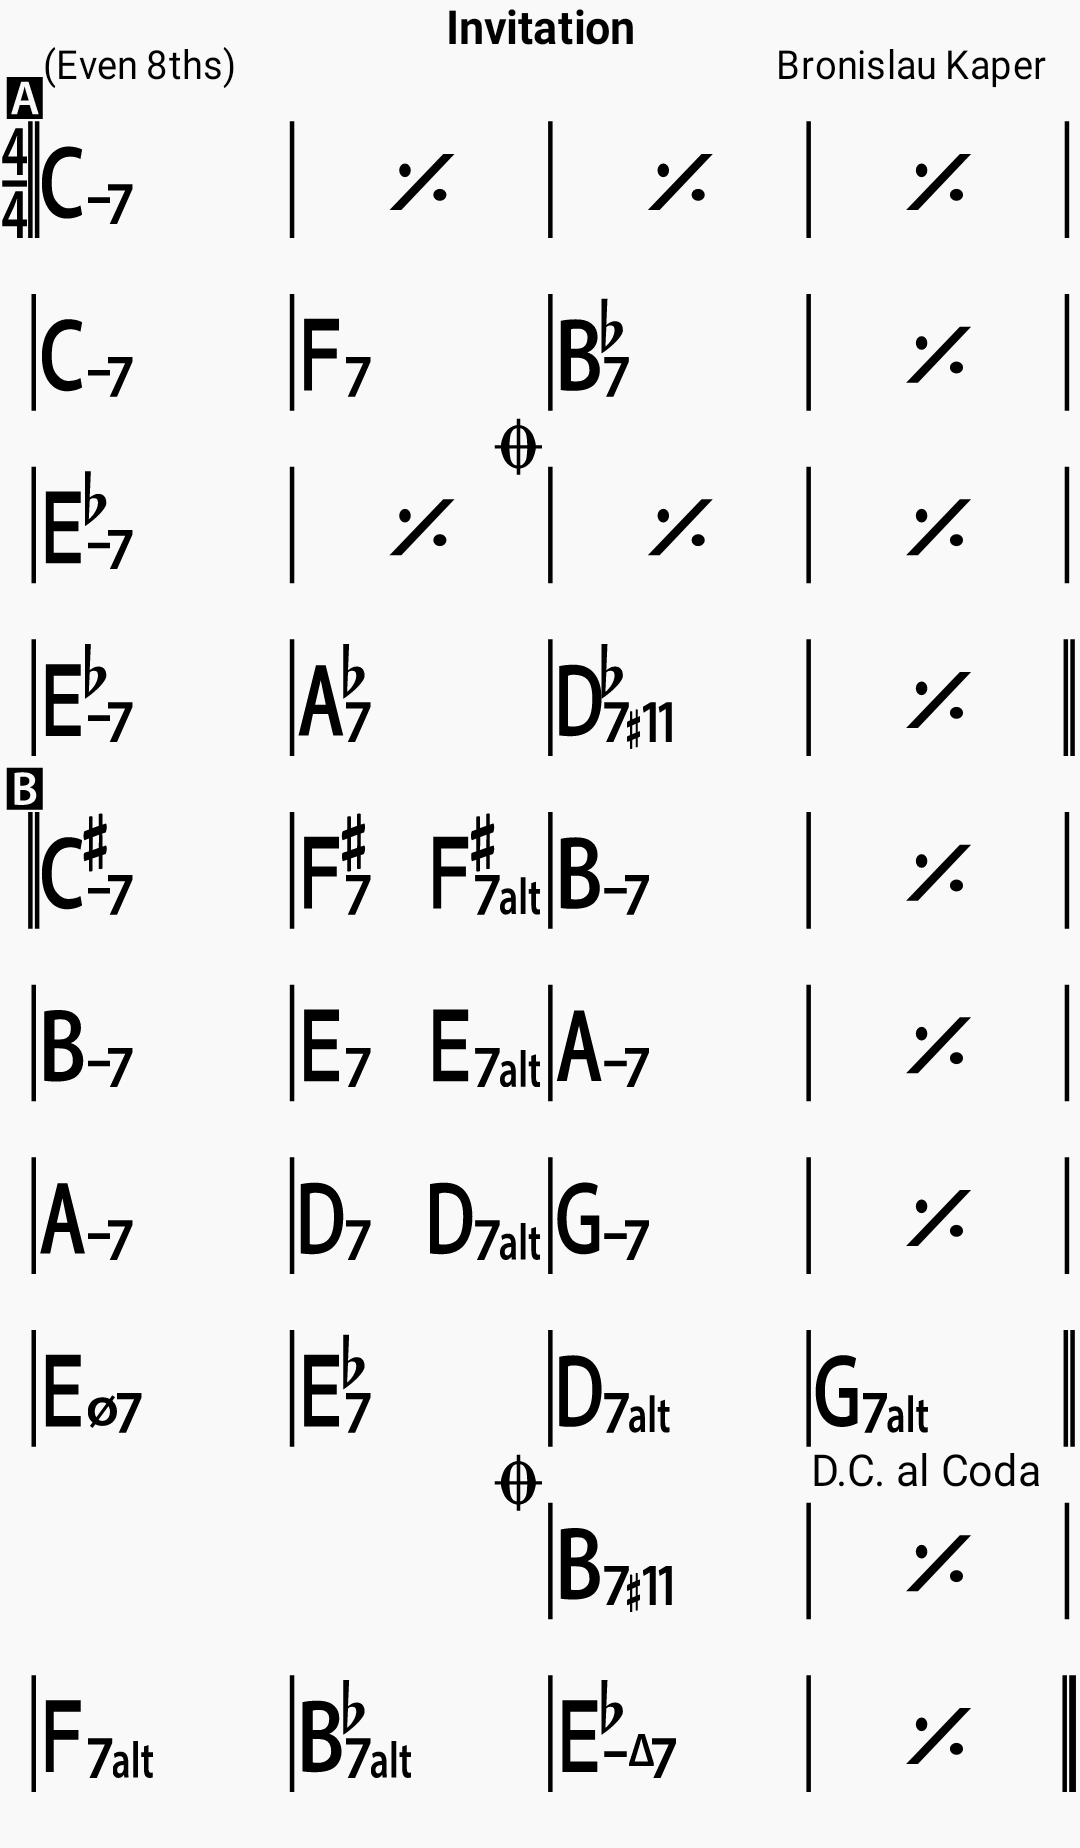 Chord chart for the jazz standard Invitation